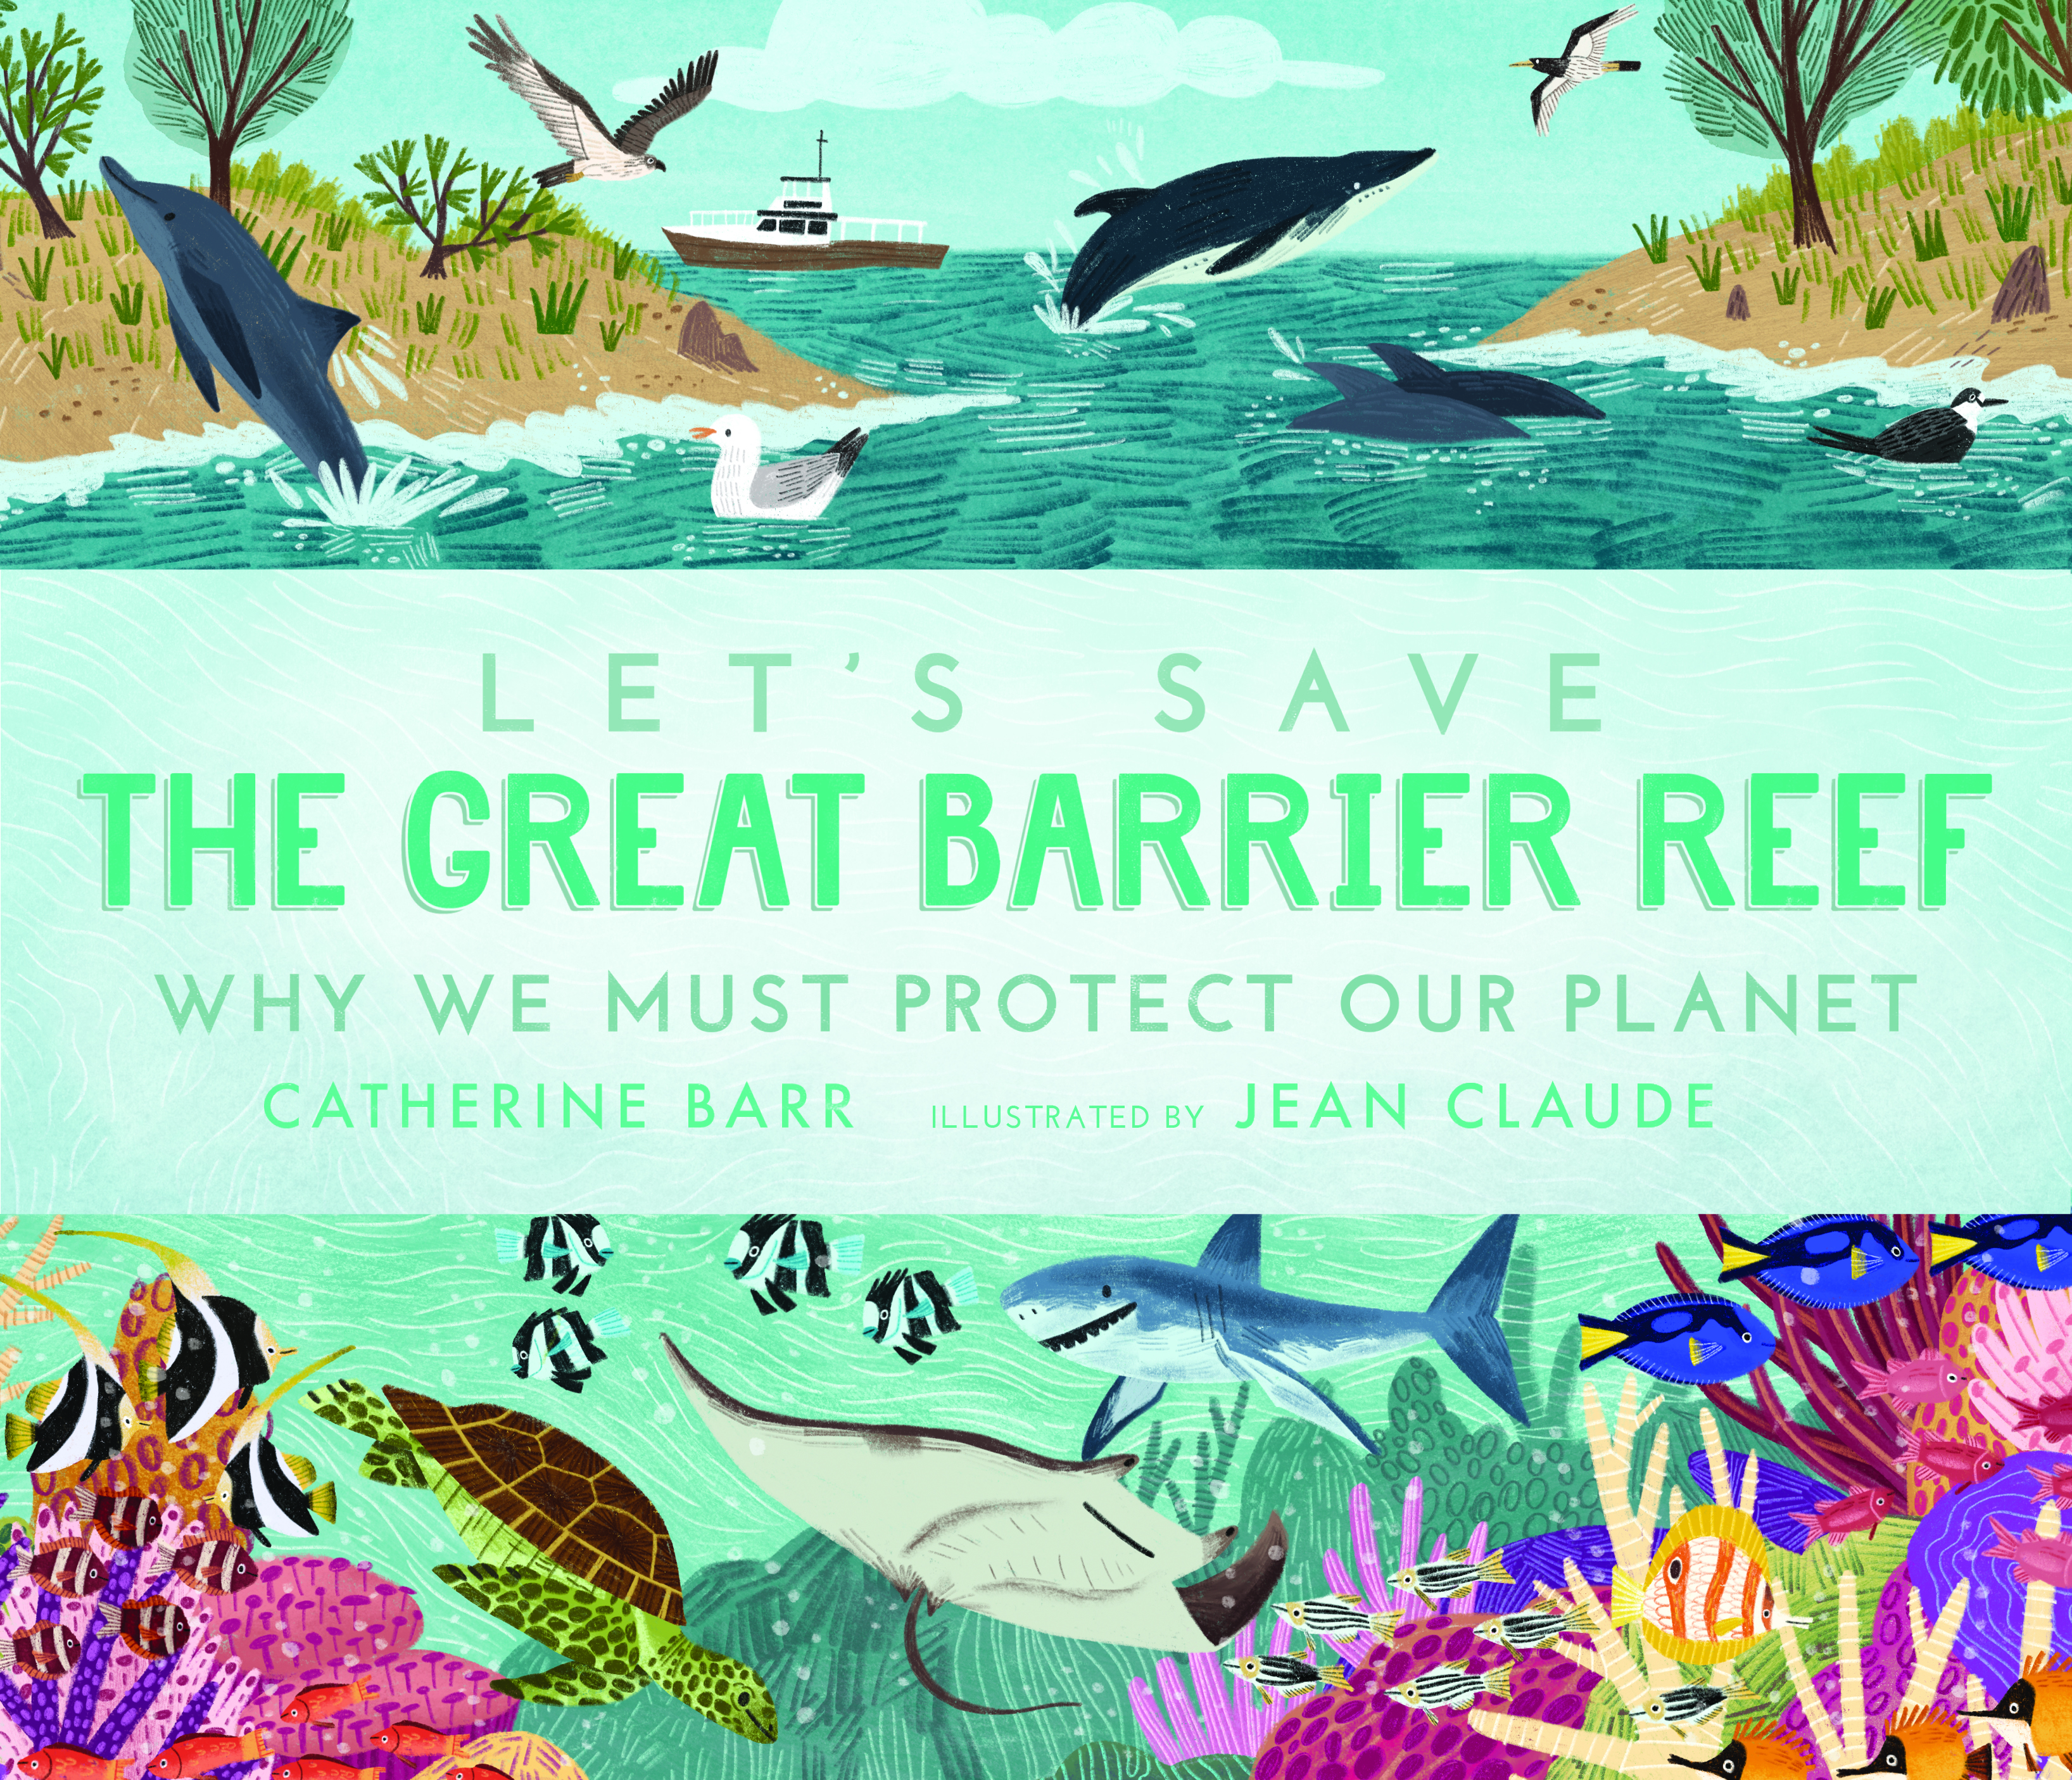 Let-s-Save-the-Great-Barrier-Reef-Why-we-must-protect-our-planet